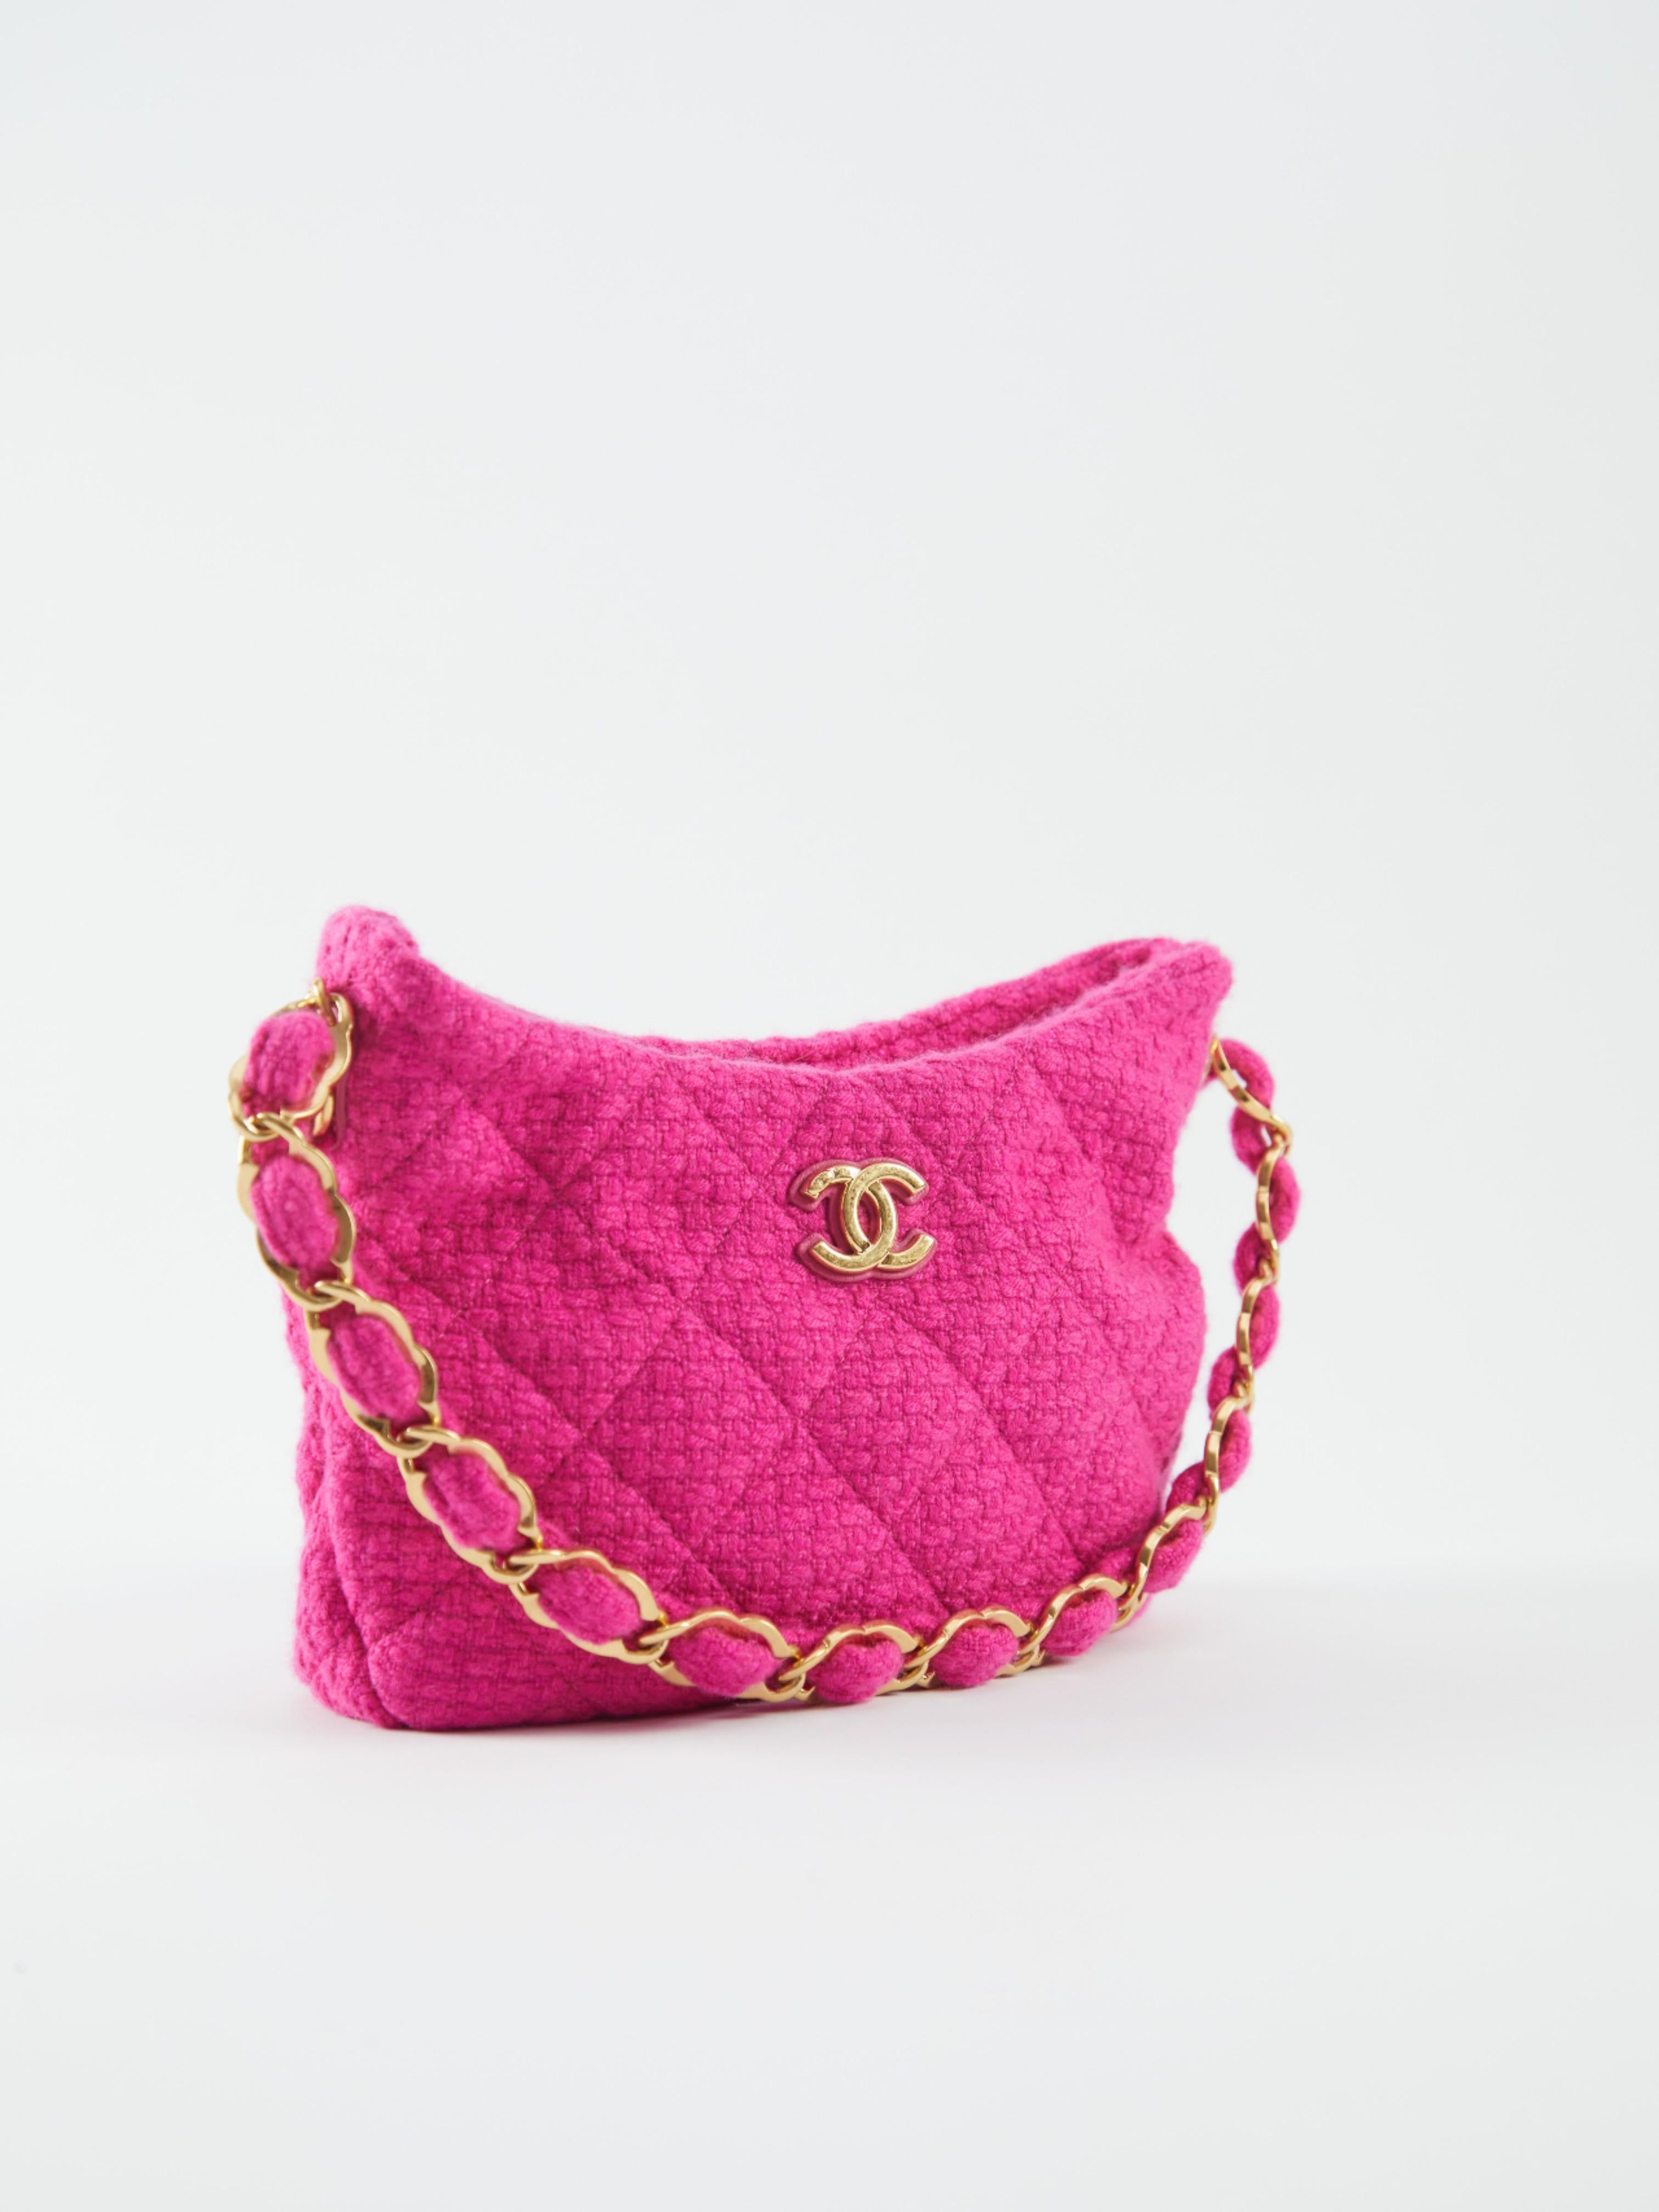 Chanel Gabrielle Hobo Bag in Pink

Tweed with Gold-Tone Hardware 

Accompanied by: Box & Dustbag 

Dimensions: 15 × 20 × 8 cm